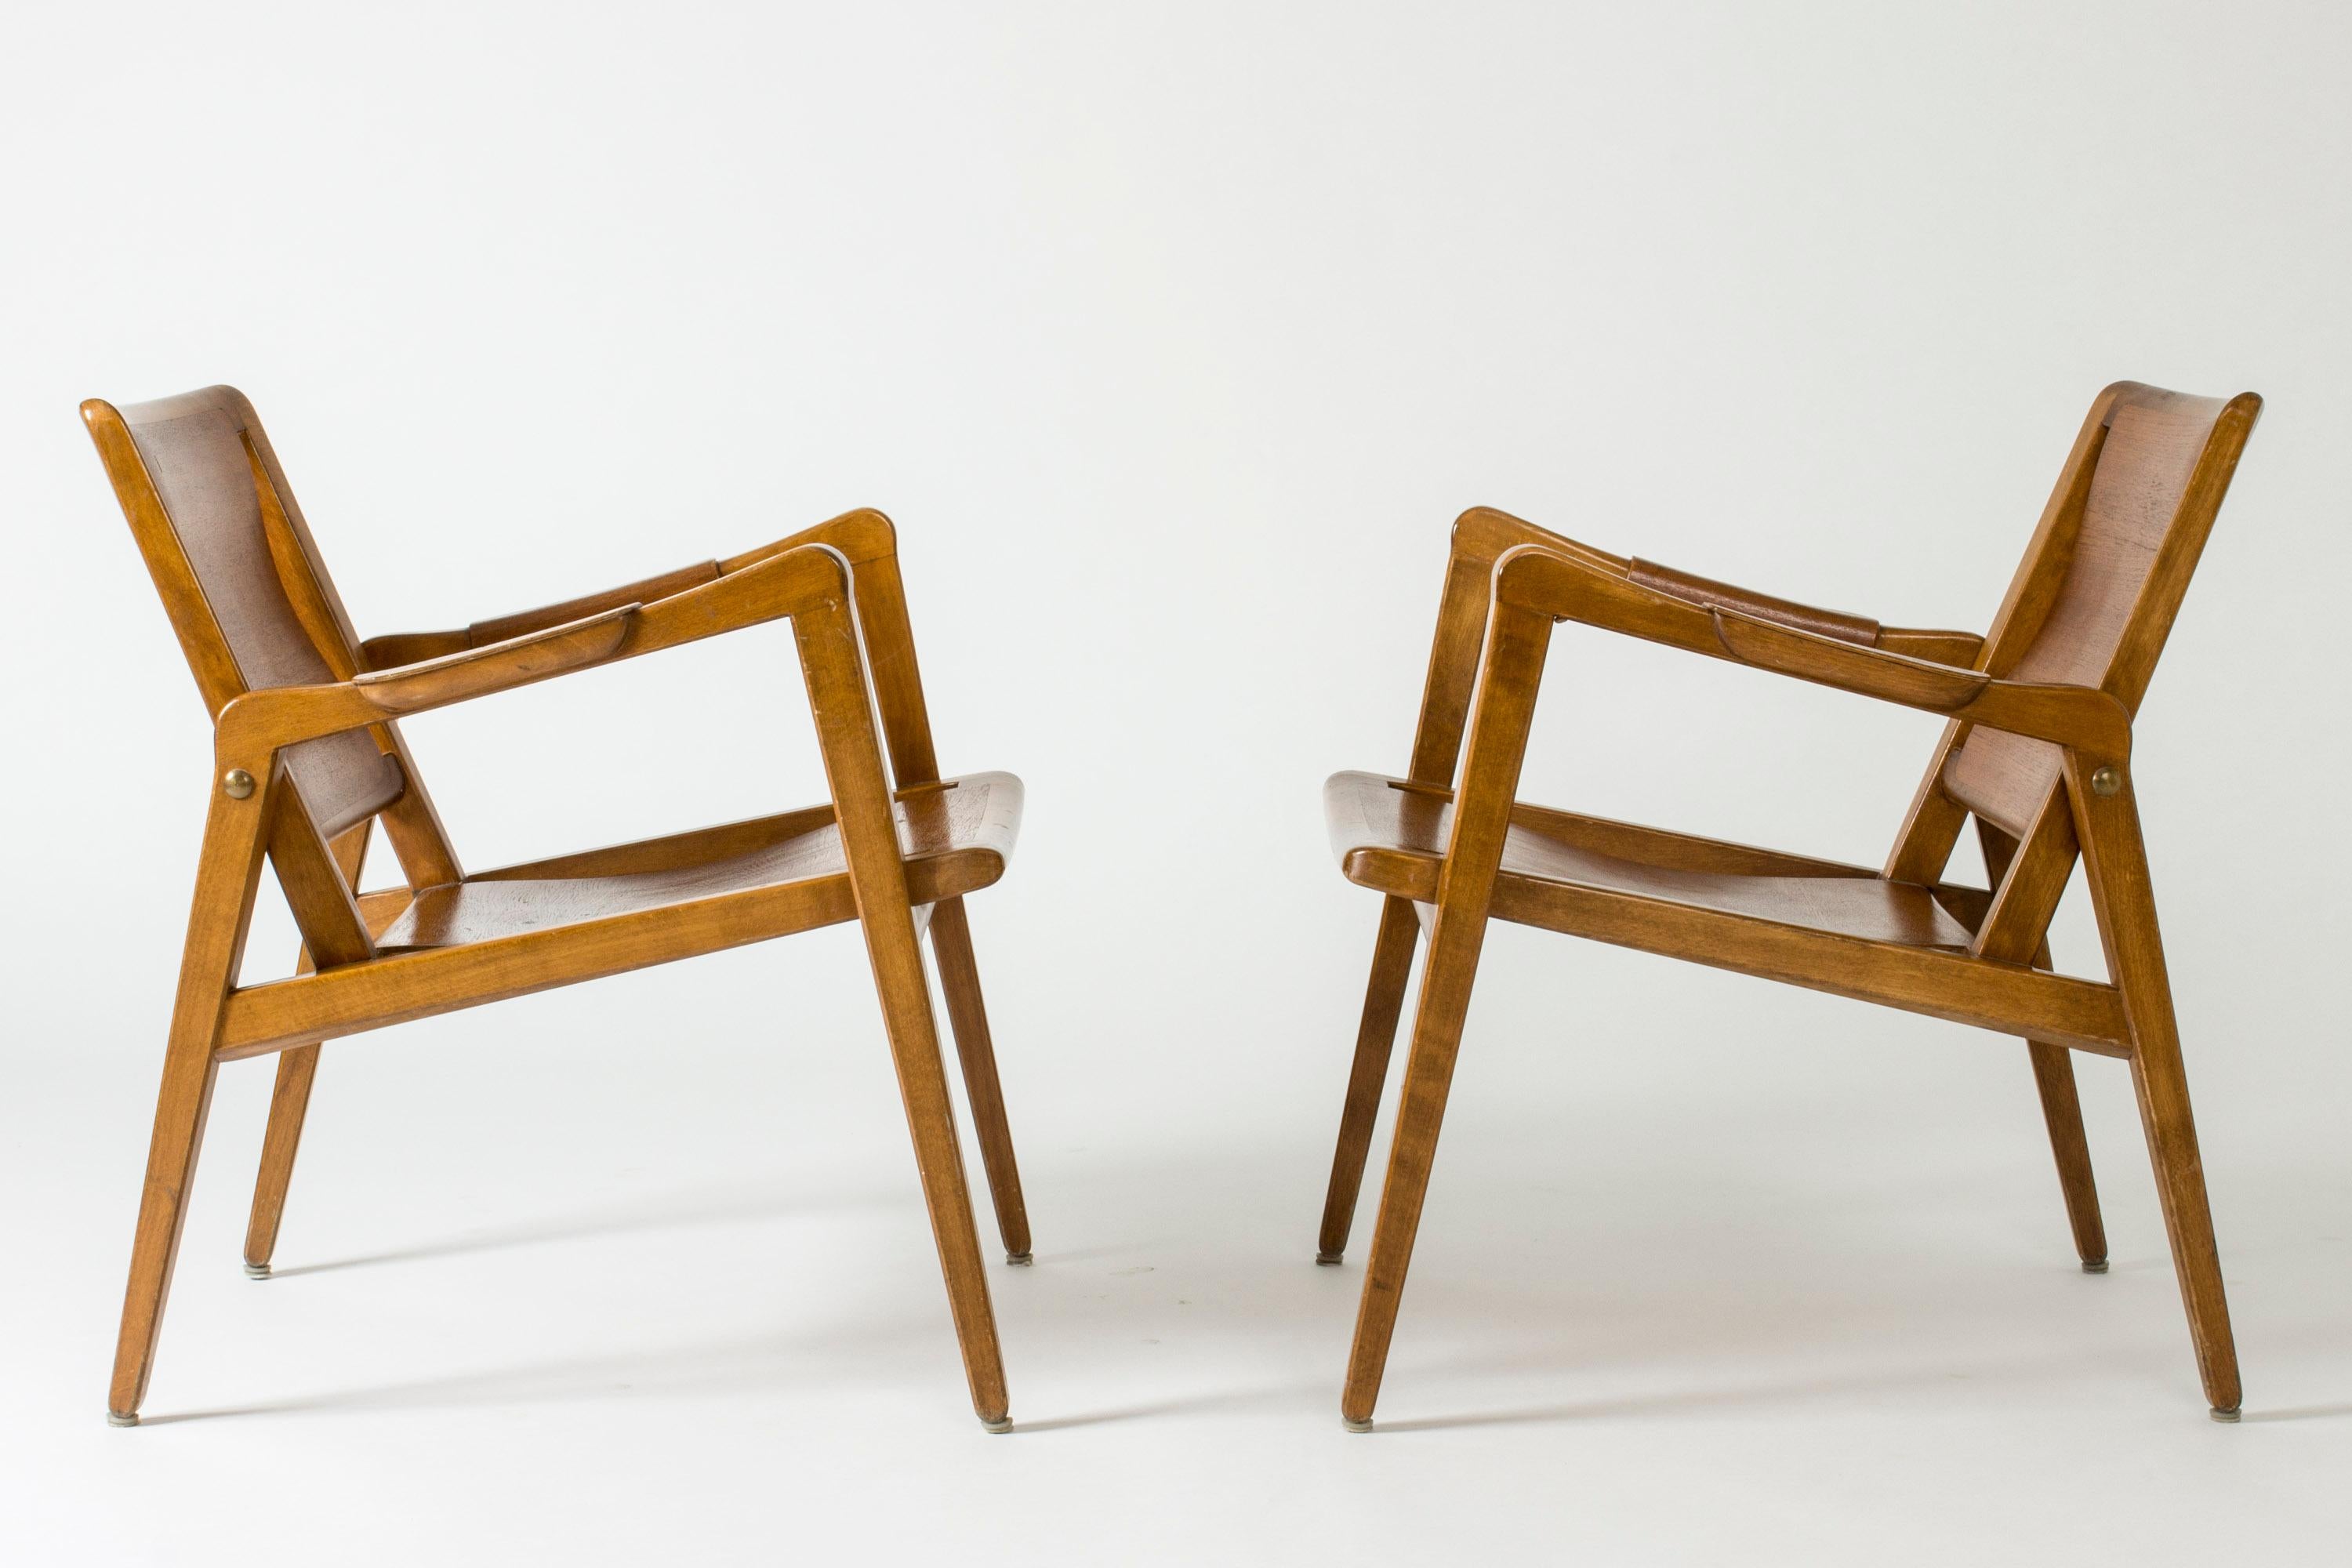 Mid-20th Century Pair of Armchairs by Axel Larsson for Bodafors, Sweden, 1940s.